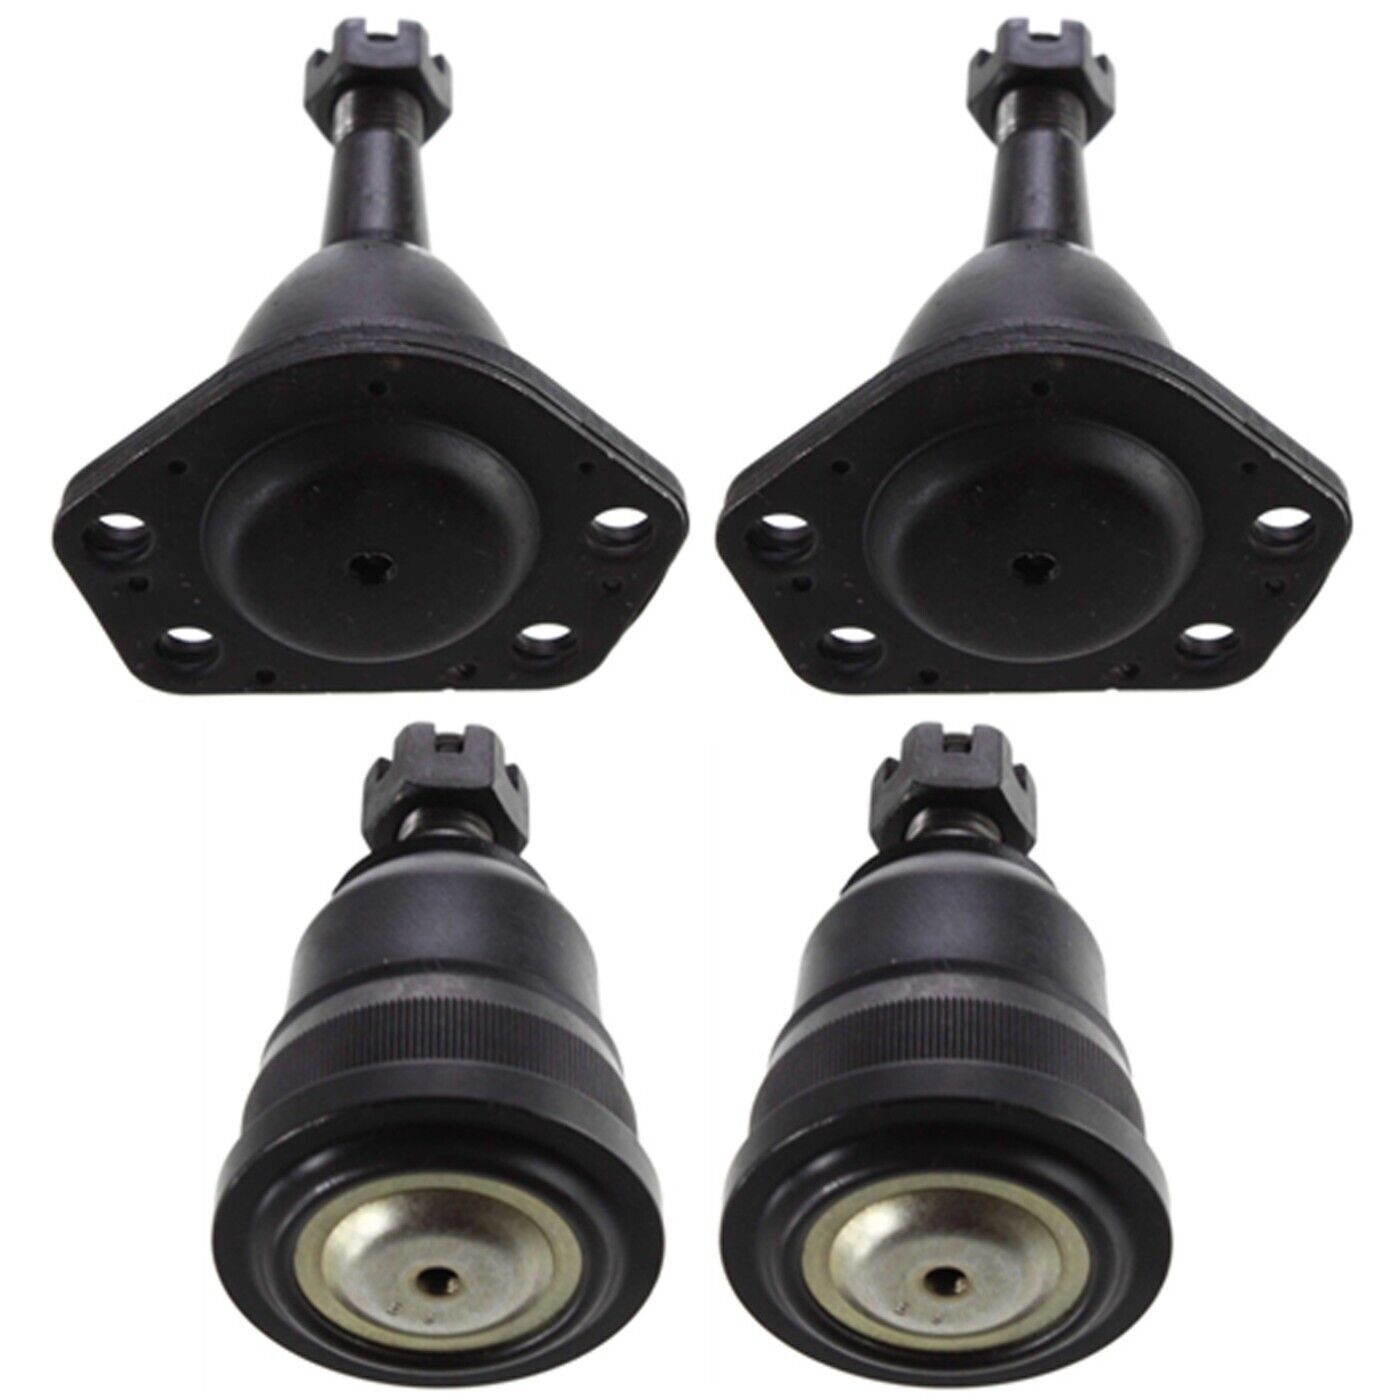 Ball Joints Set For 1977-1996 Chevrolet Caprice and Impala Front Upper and Lower